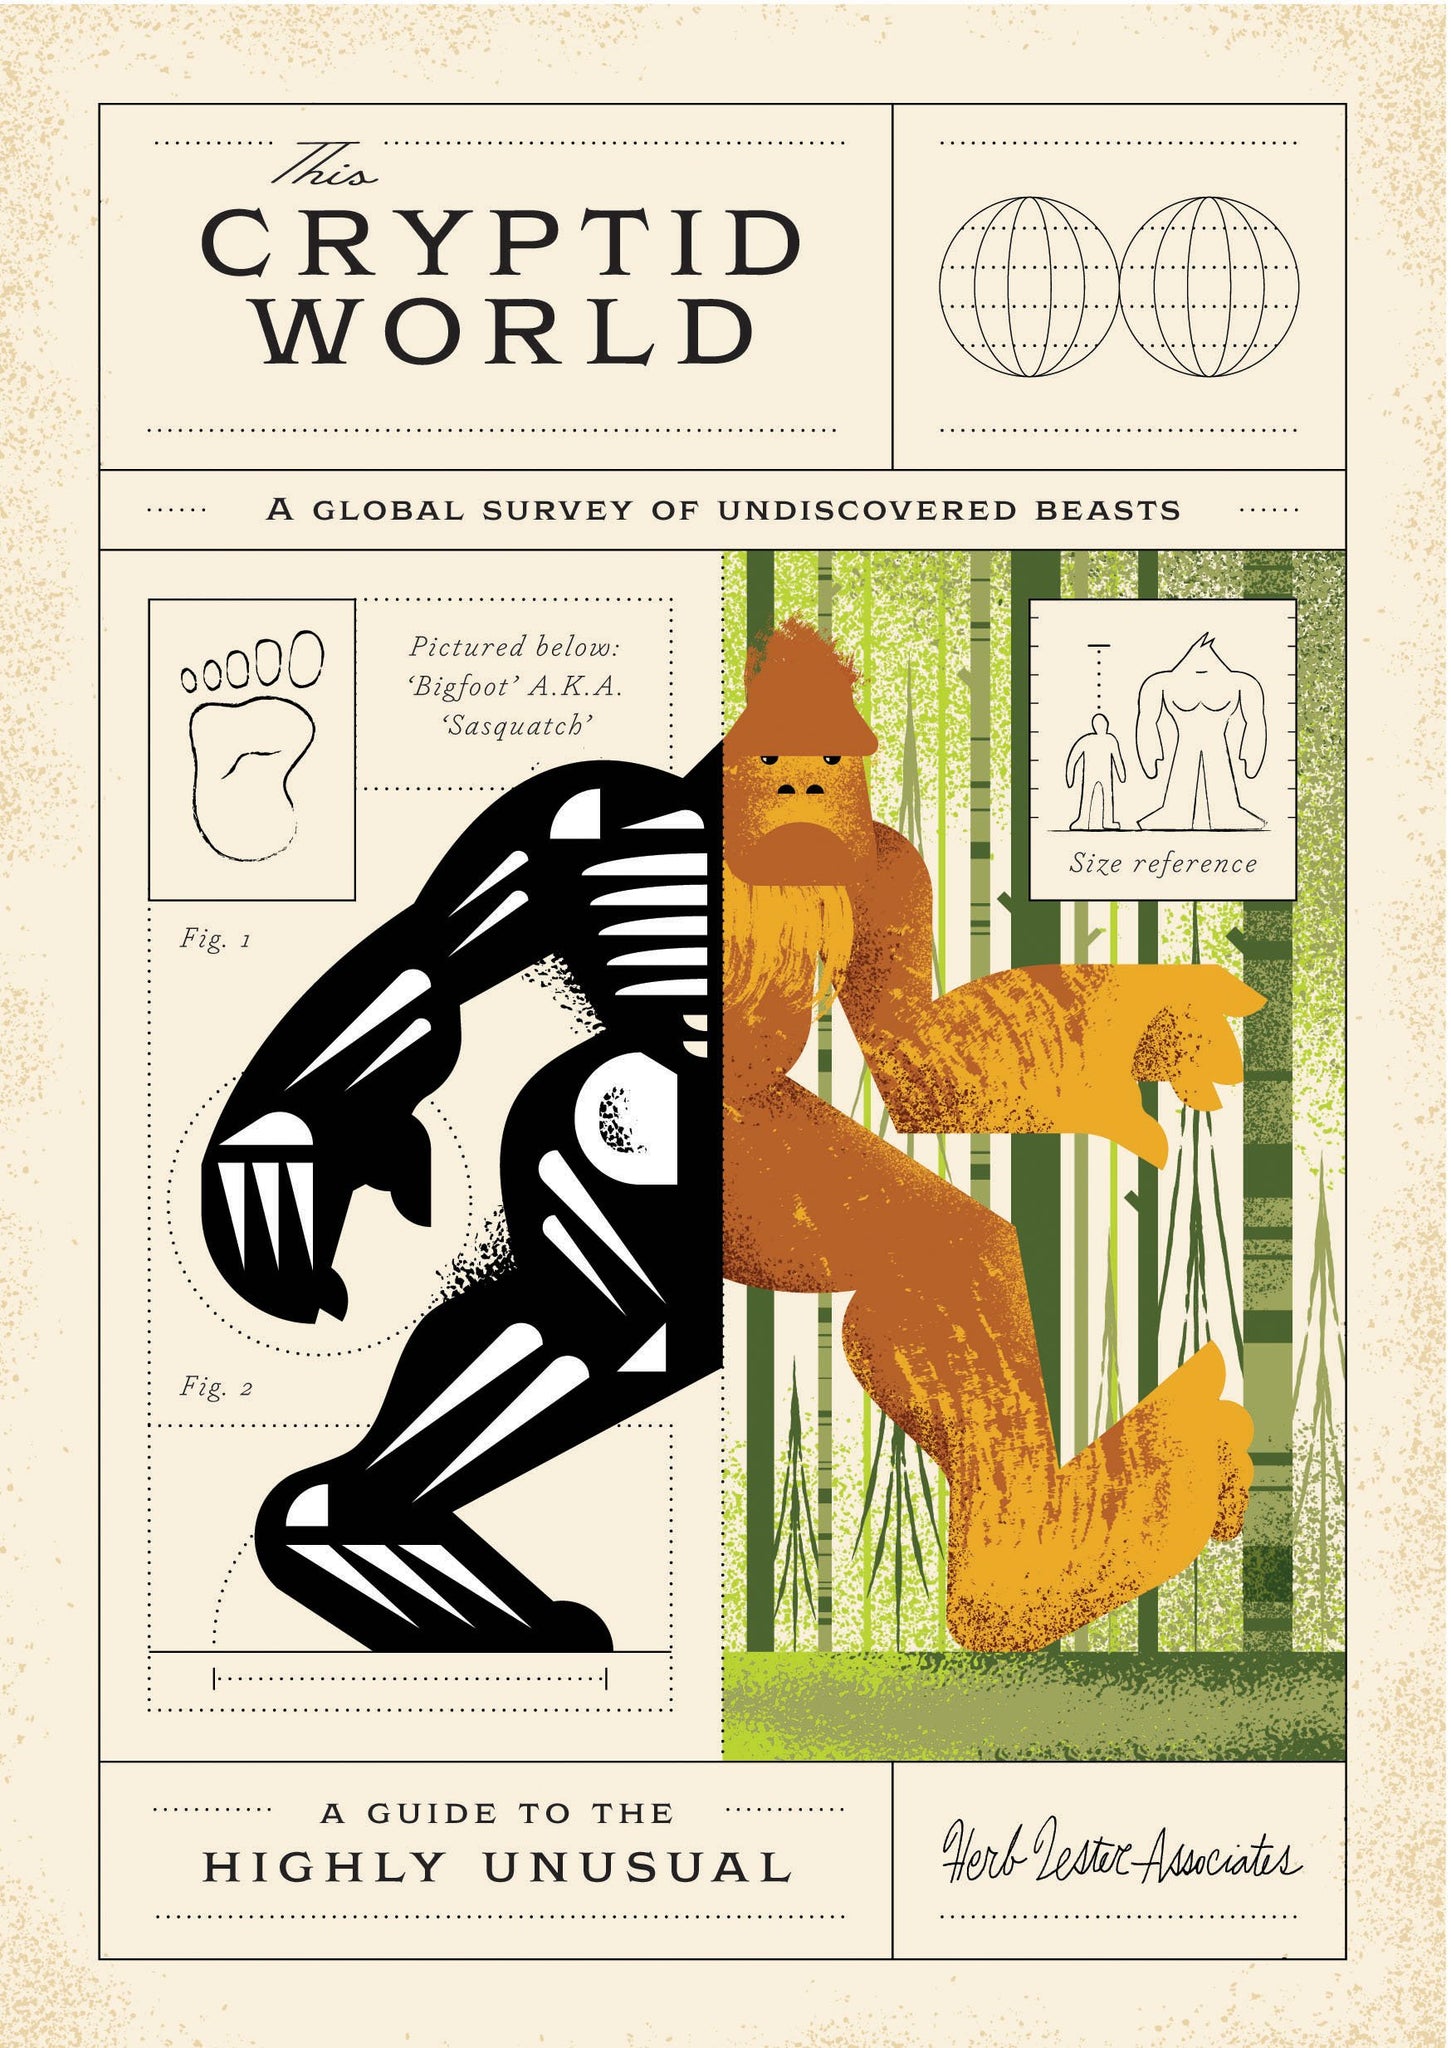 This Cryptid World: A Global Survey of Undiscovered Beasts cover